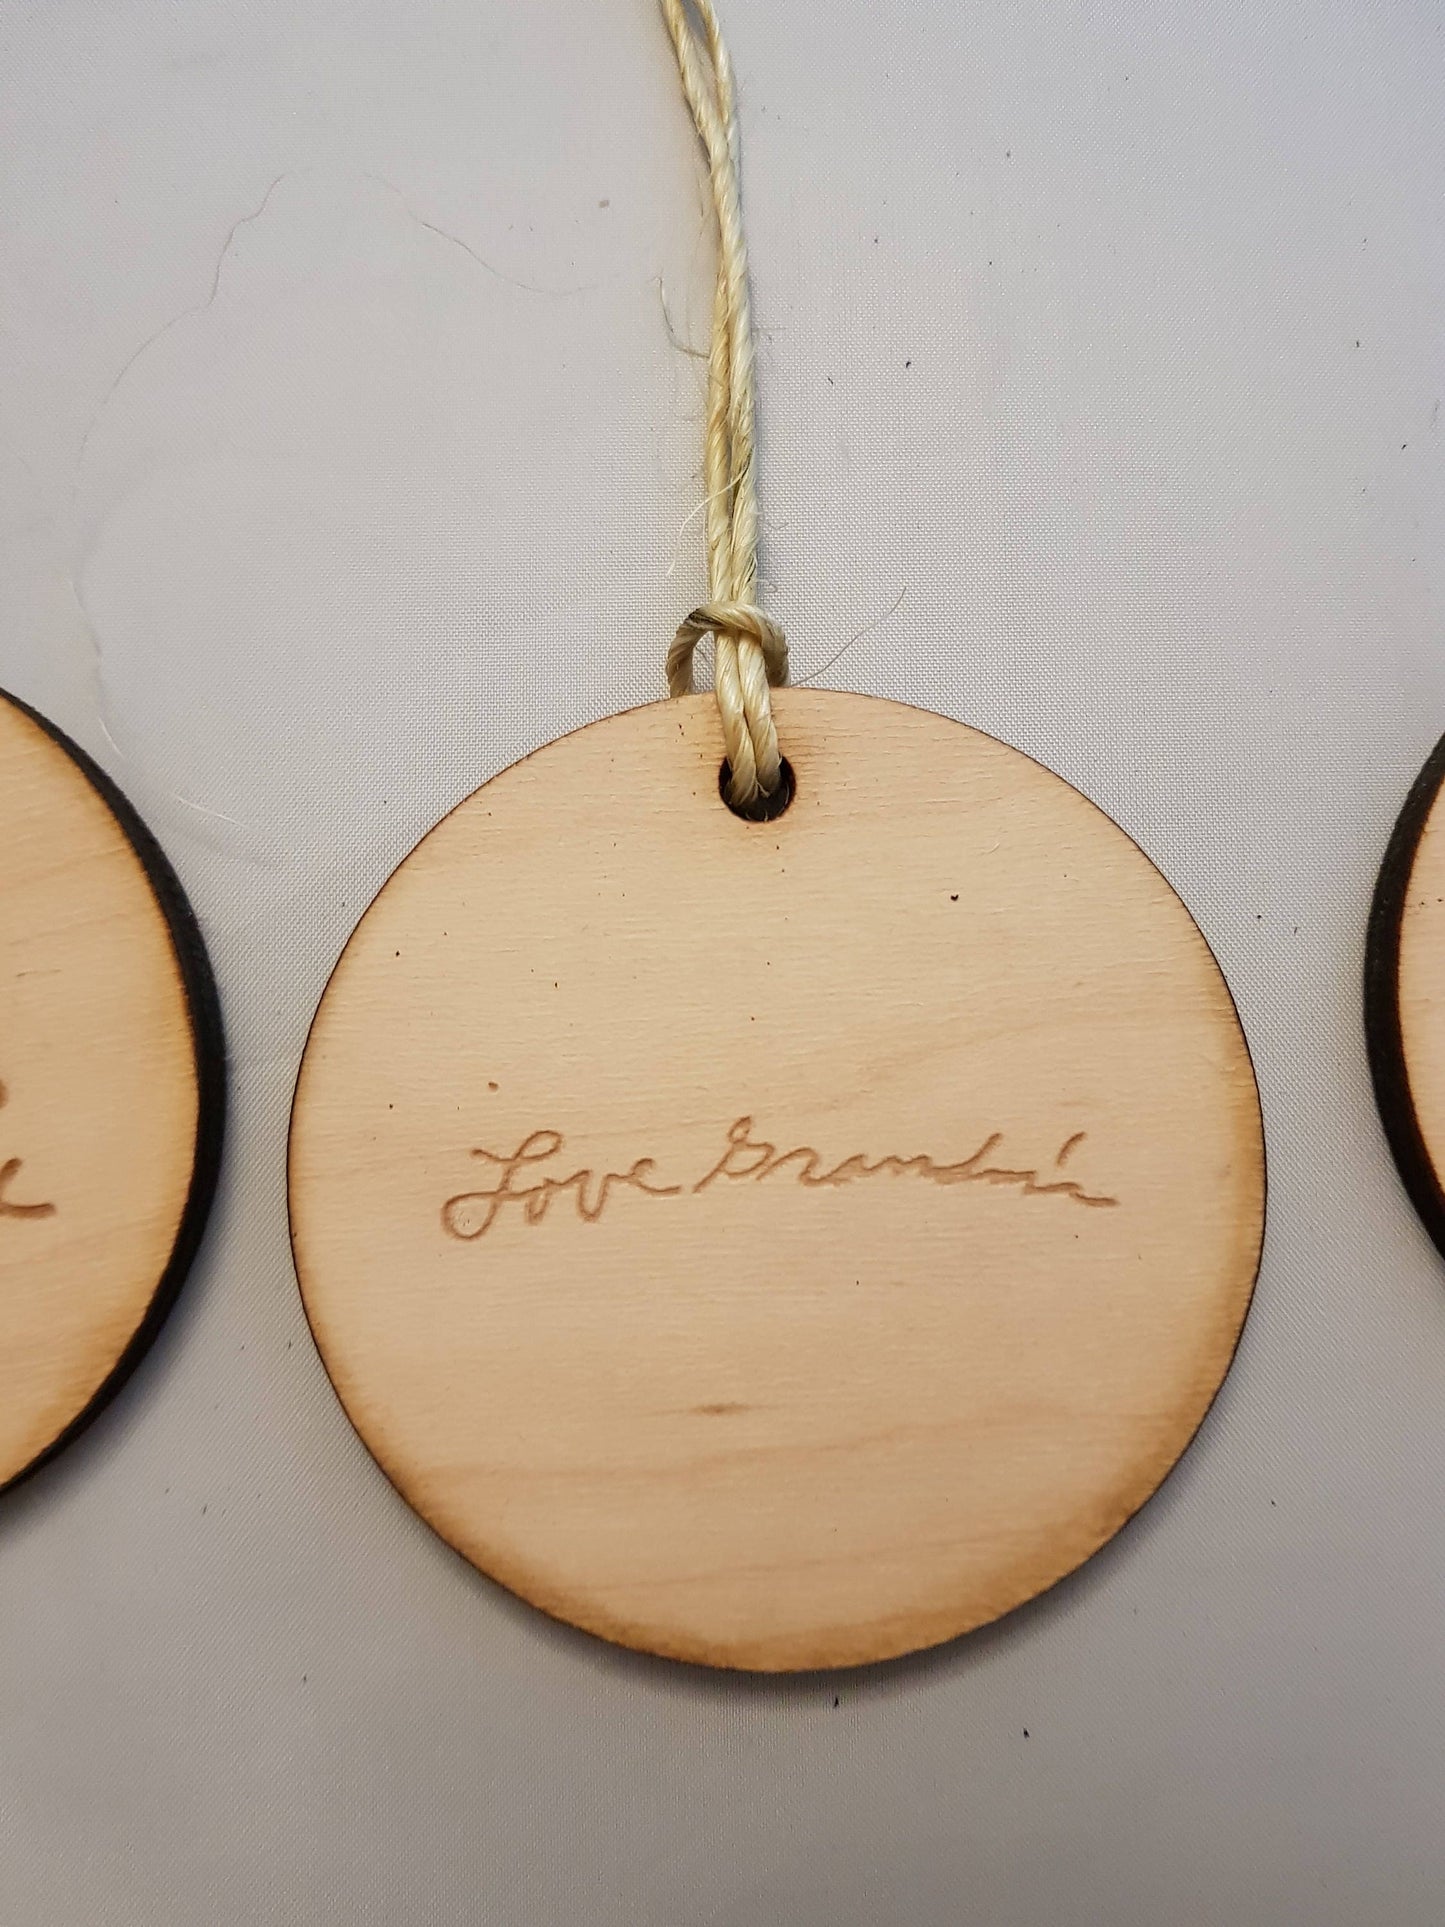 Your Hand Writing, Actual Handwriting, In Memory Of, Personalized Ornament, Actual Sketch, Wood Engraving, single sided FootstepsinthePast